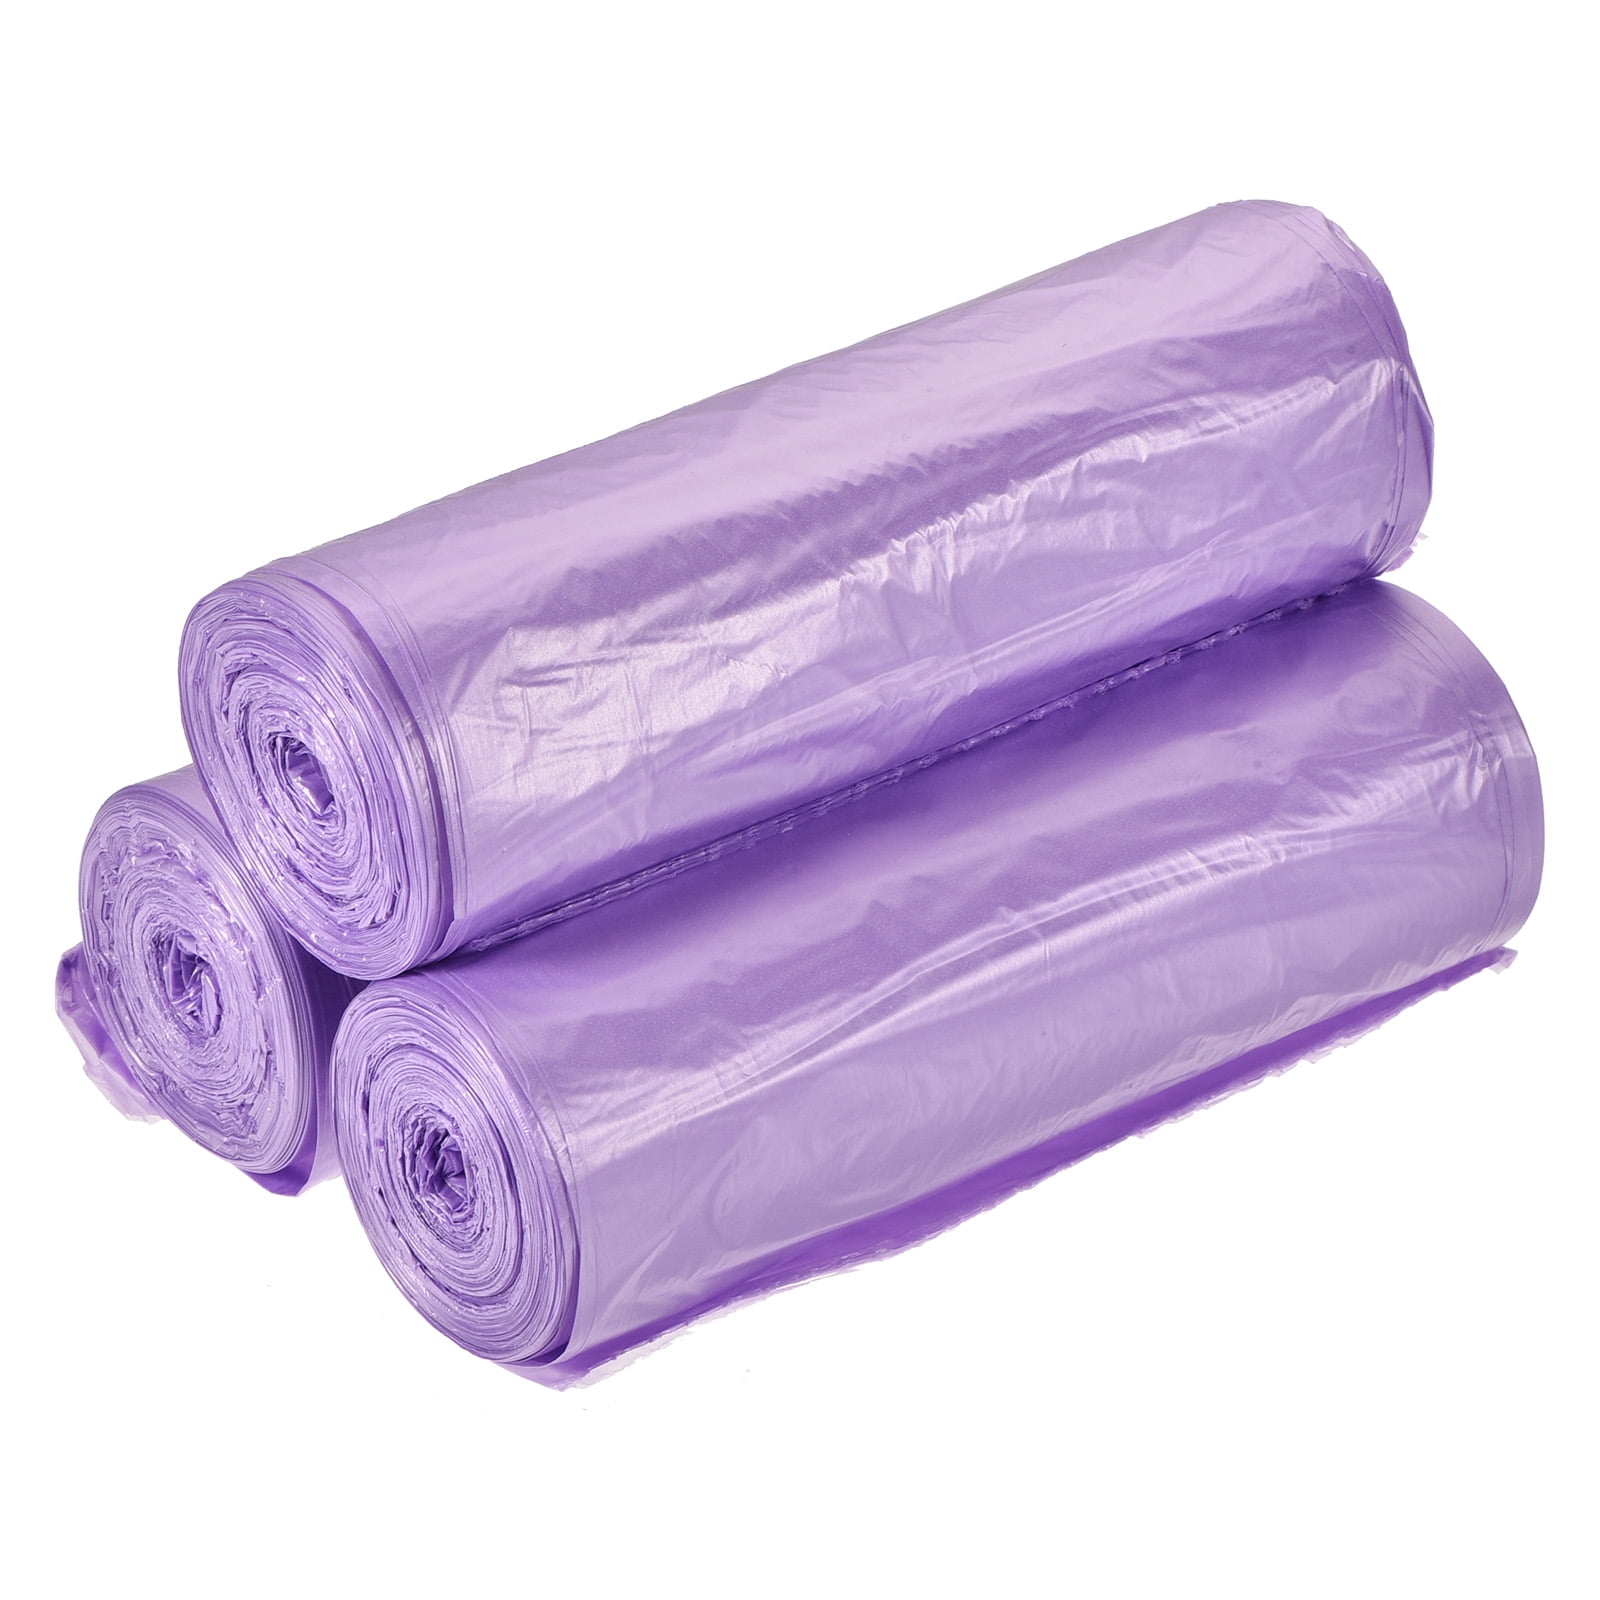 5 Rolls/pack, Approximately 75 Pieces/pack, Purple Color, Disposable  Plastic Garbage Bag, Thin Type, Easy-tear Flat Top Trash Can Liner For Home  Use